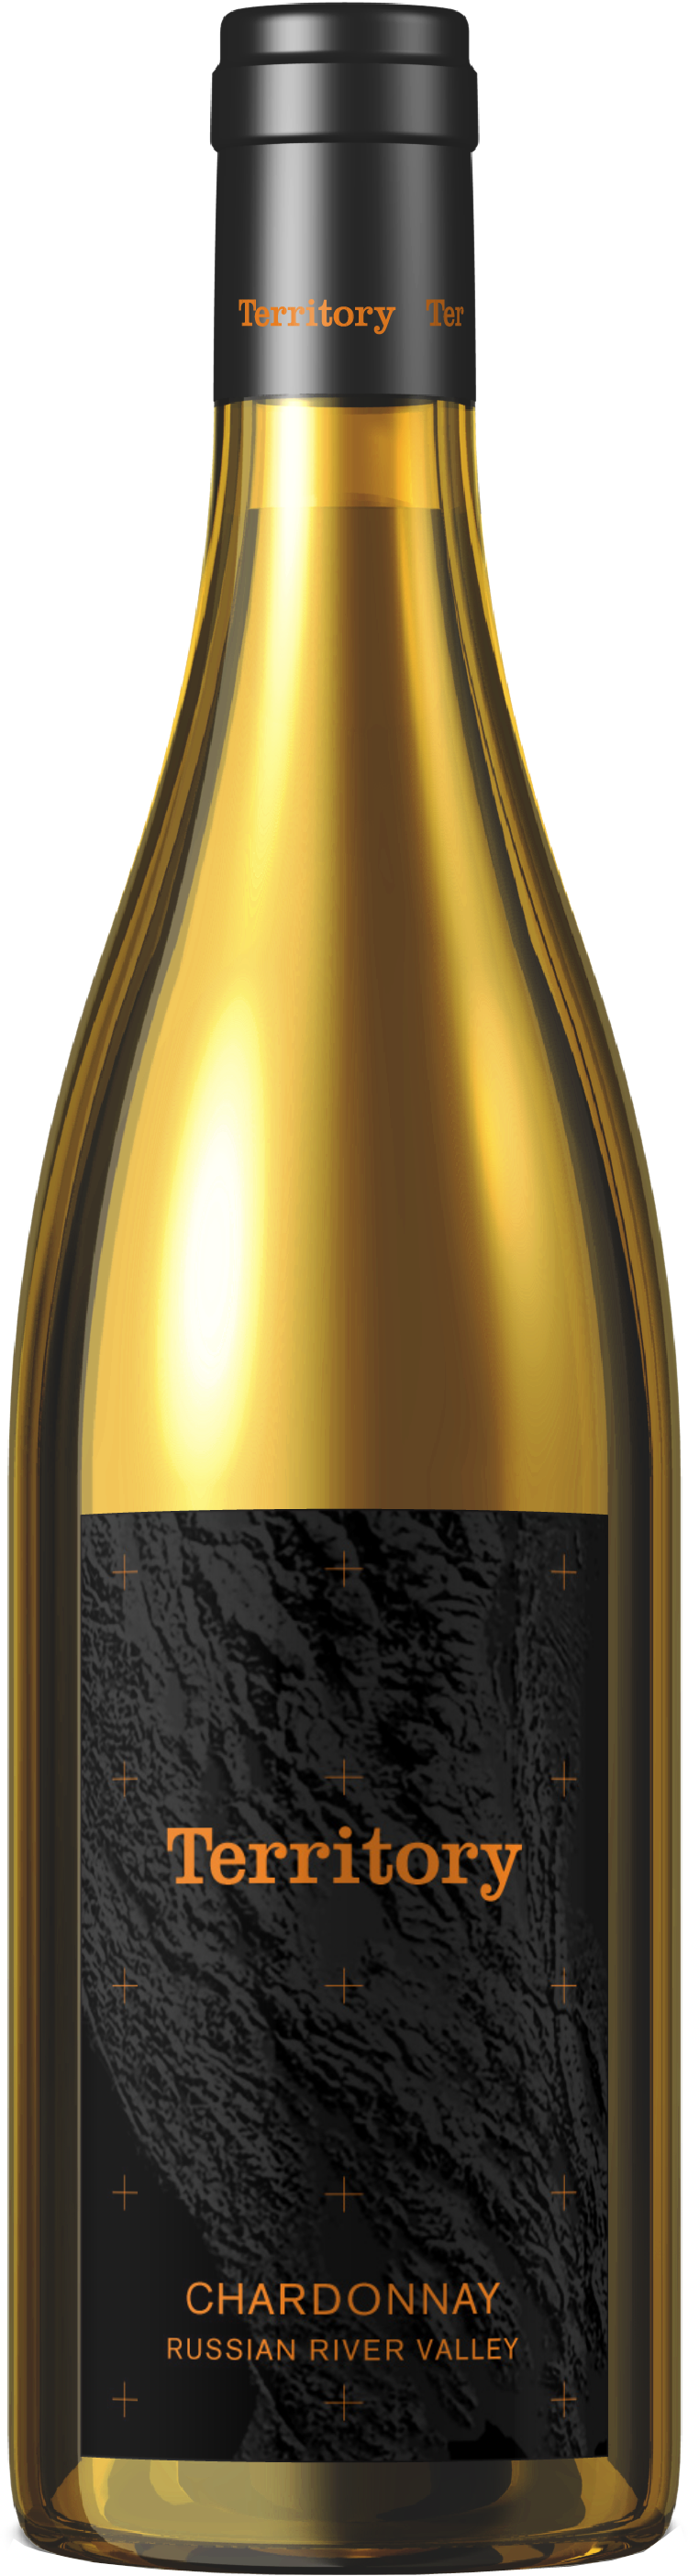 Product Image for Estate Chardonnay